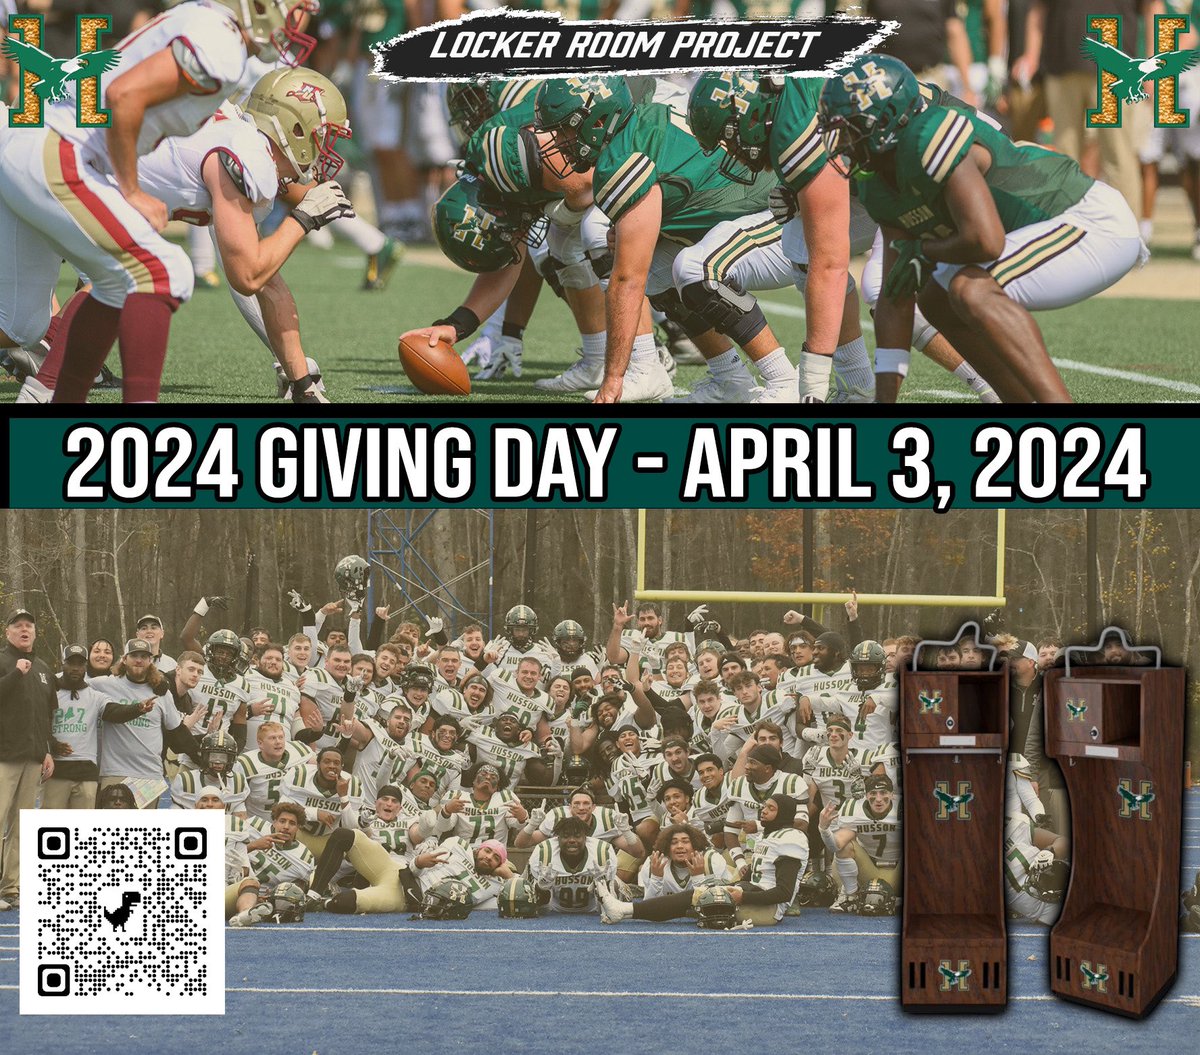 Husson Giving Day is Tomorrow, April 3rd! L We are currently $35k away from our goal of over $100k and your gift will help the Football program achieve that goal. Any donor who gives $500 and above will also have the opportunity to name a locker! #HussonGuys 🏈🦅